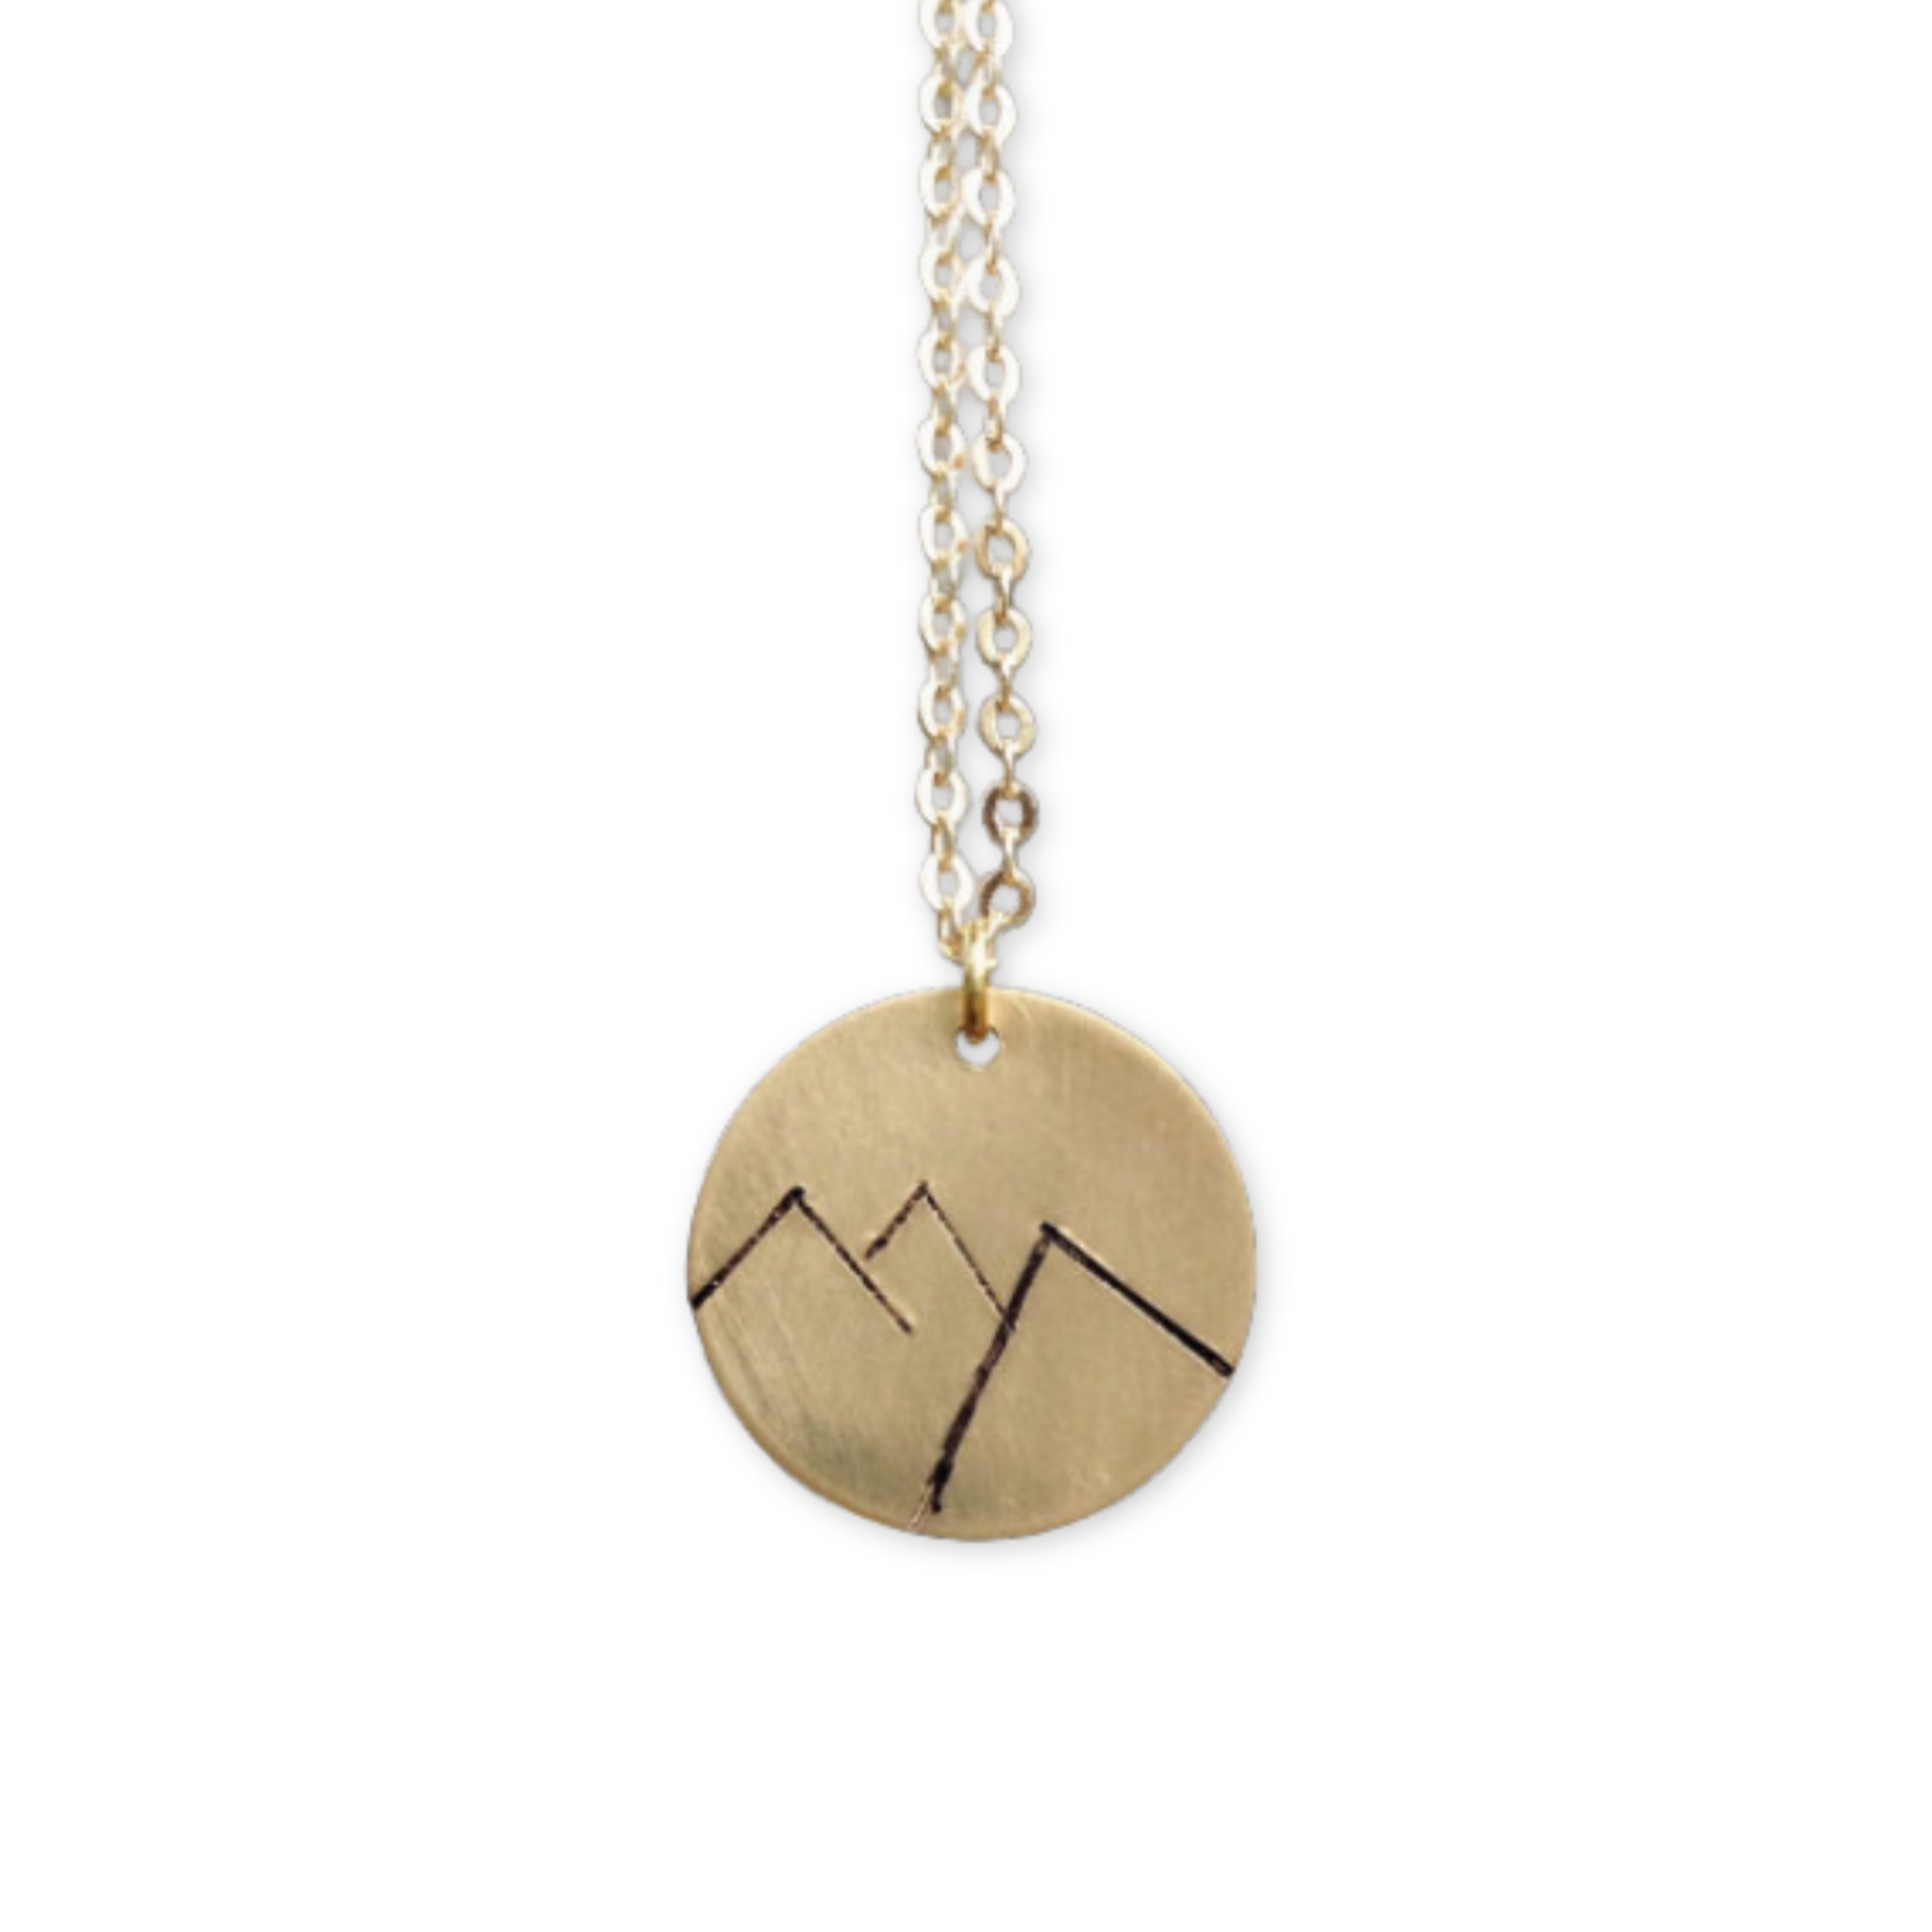 gold pendant with mountains on it